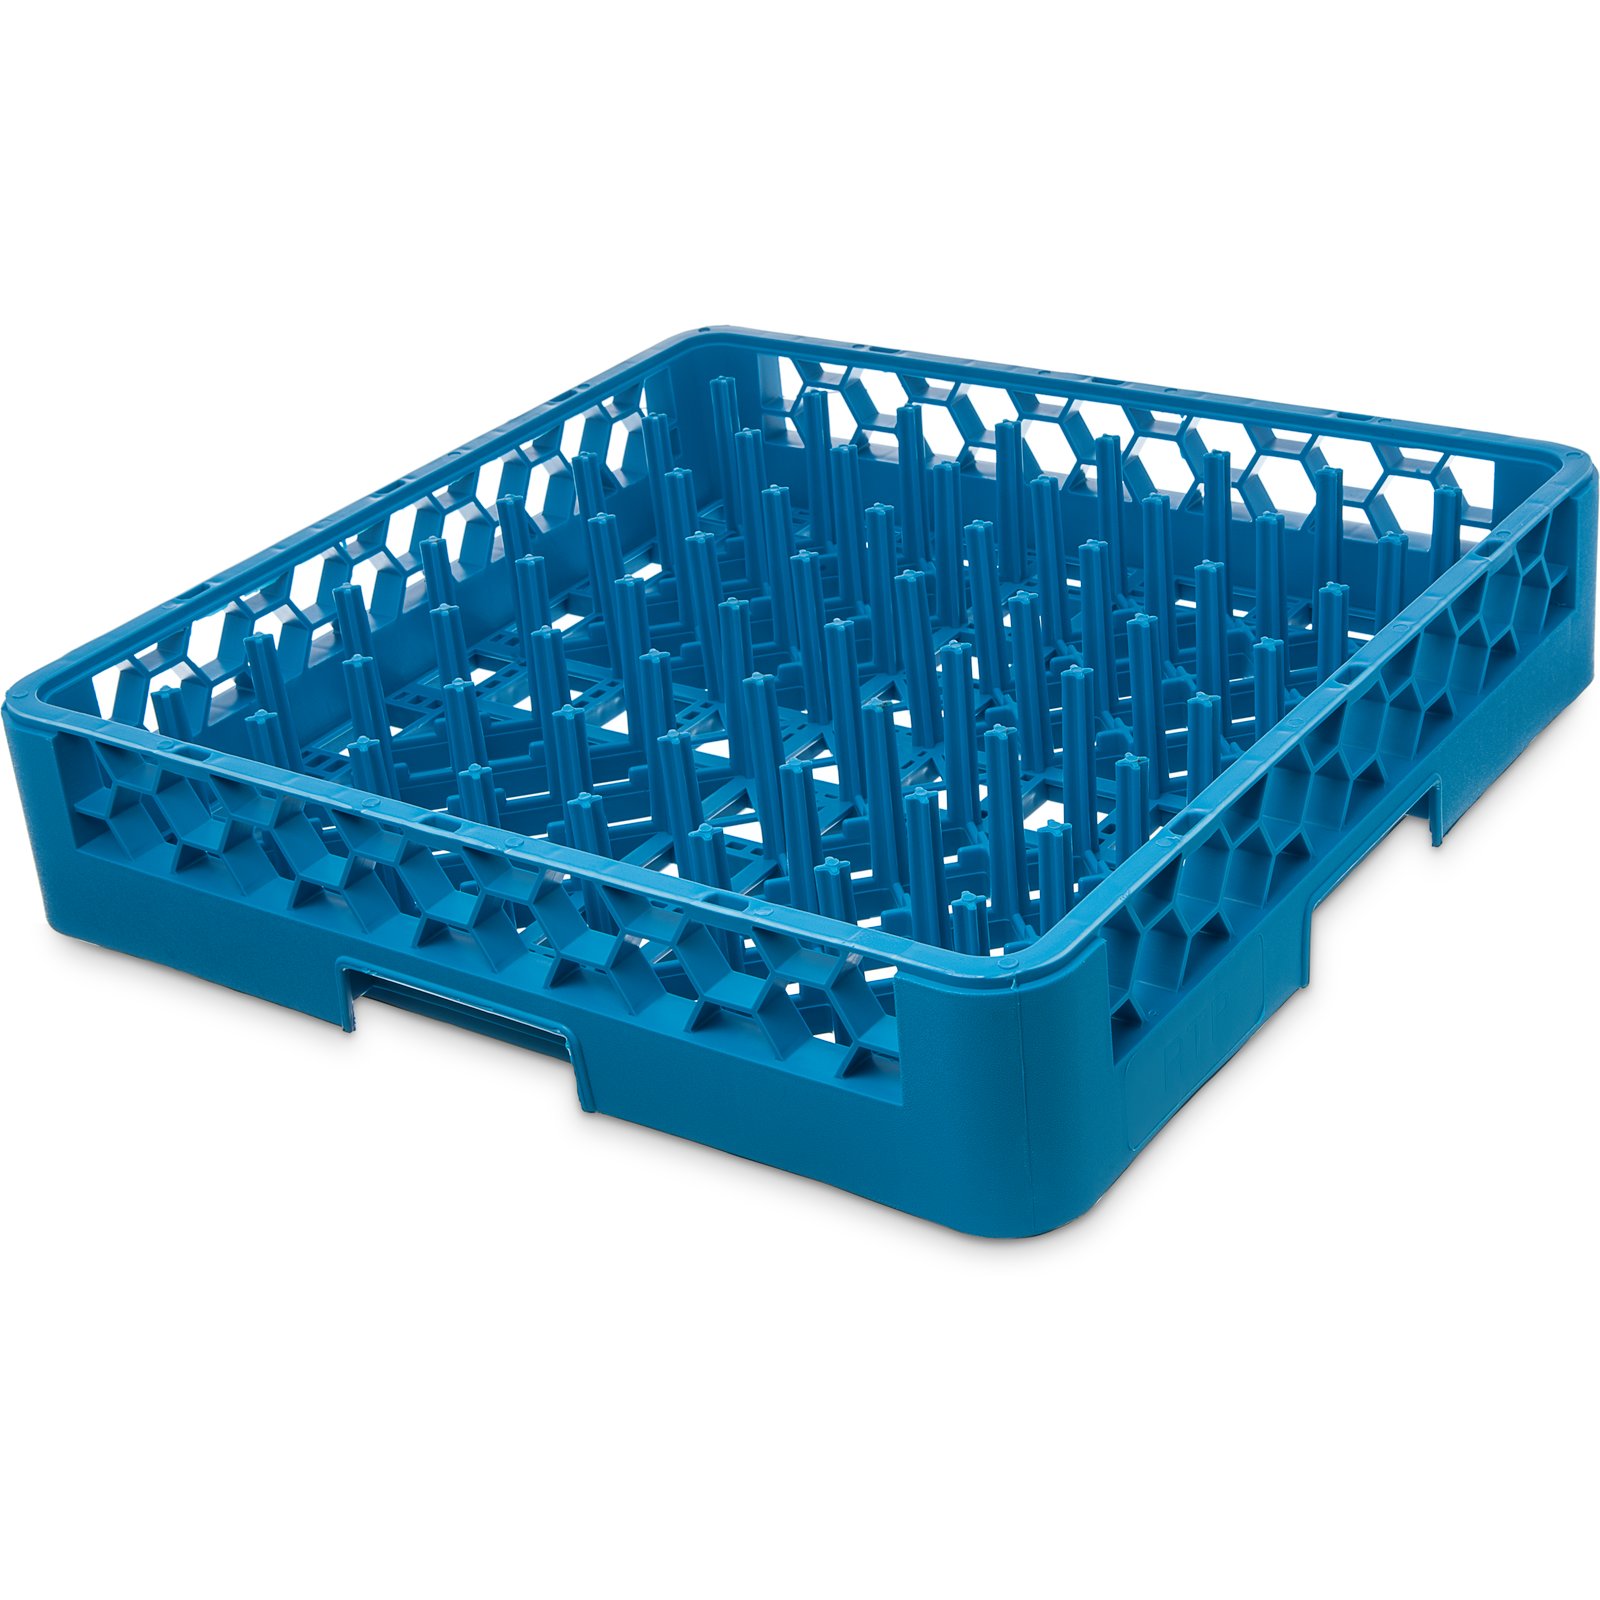 2.5 in. Dishwasher Rack for Pans or Insulated Meal Trays in Blue (Case of 3)